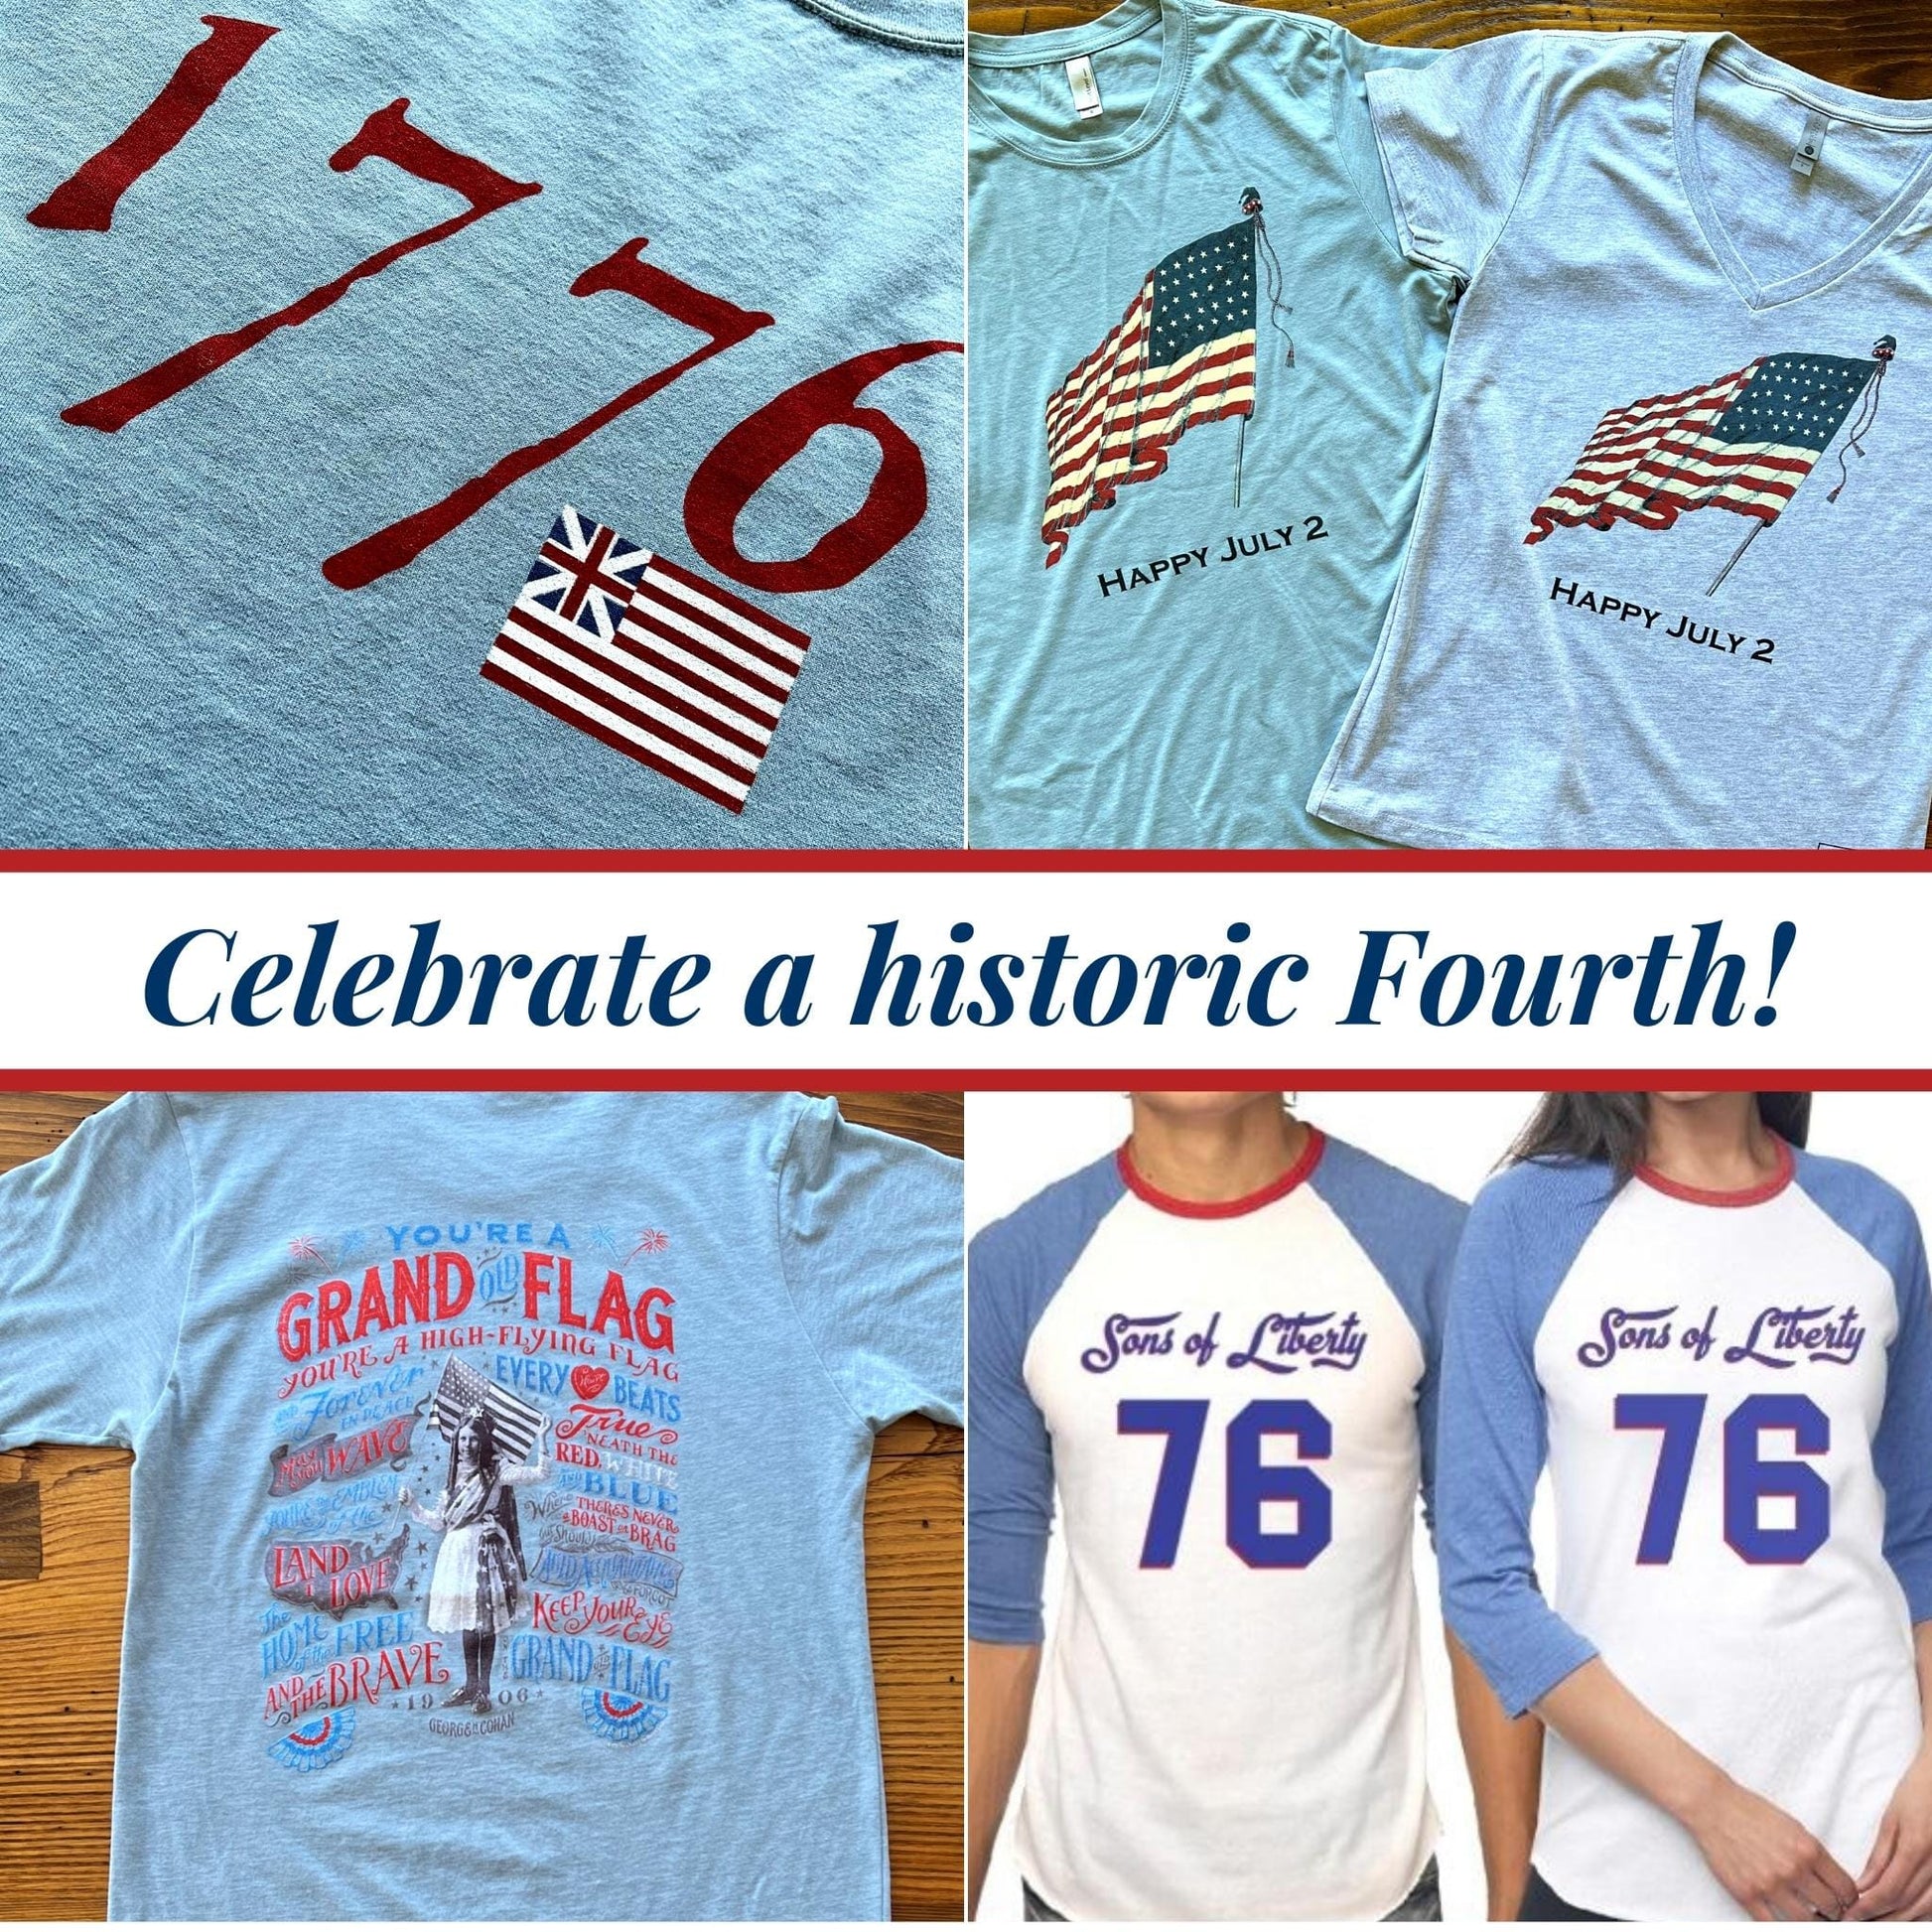 Celebrate a historic 4th Collection from the history list store